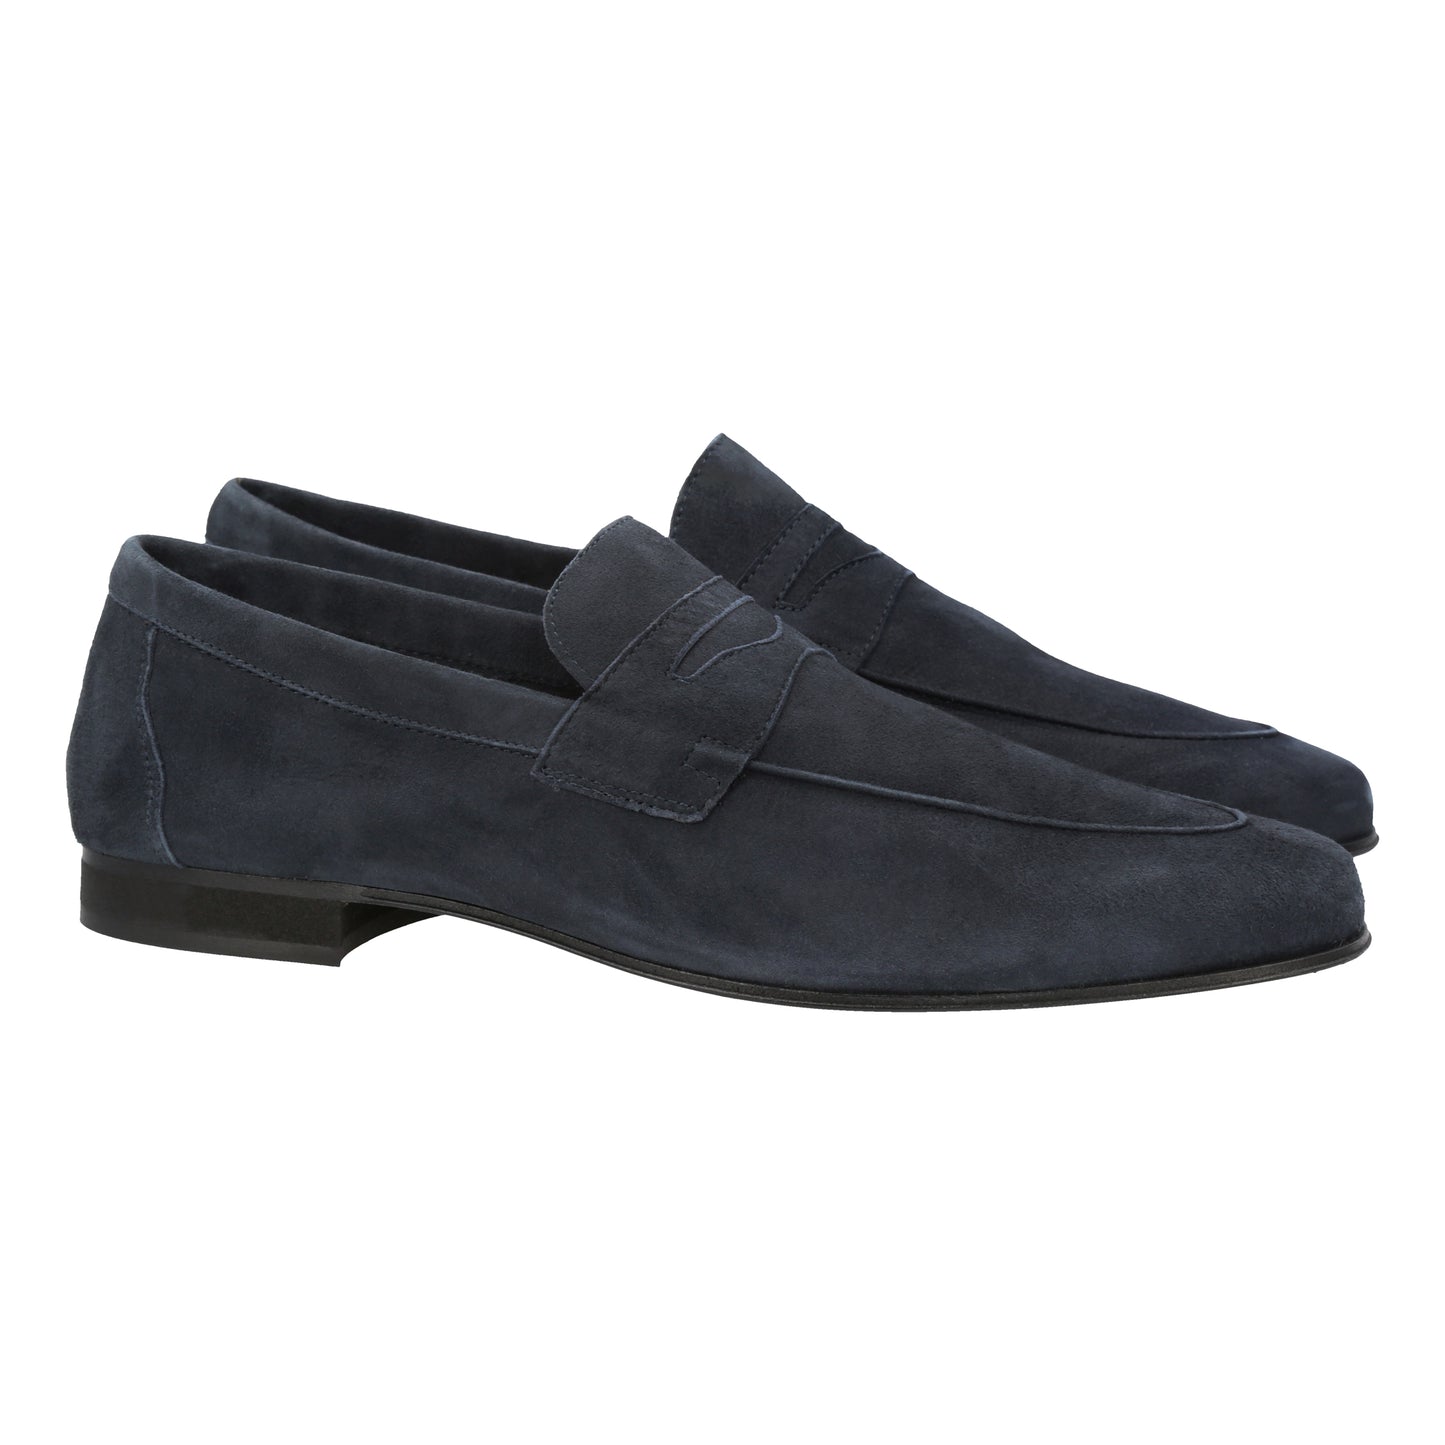 Penny Loafer "Toscana" Navy Suede